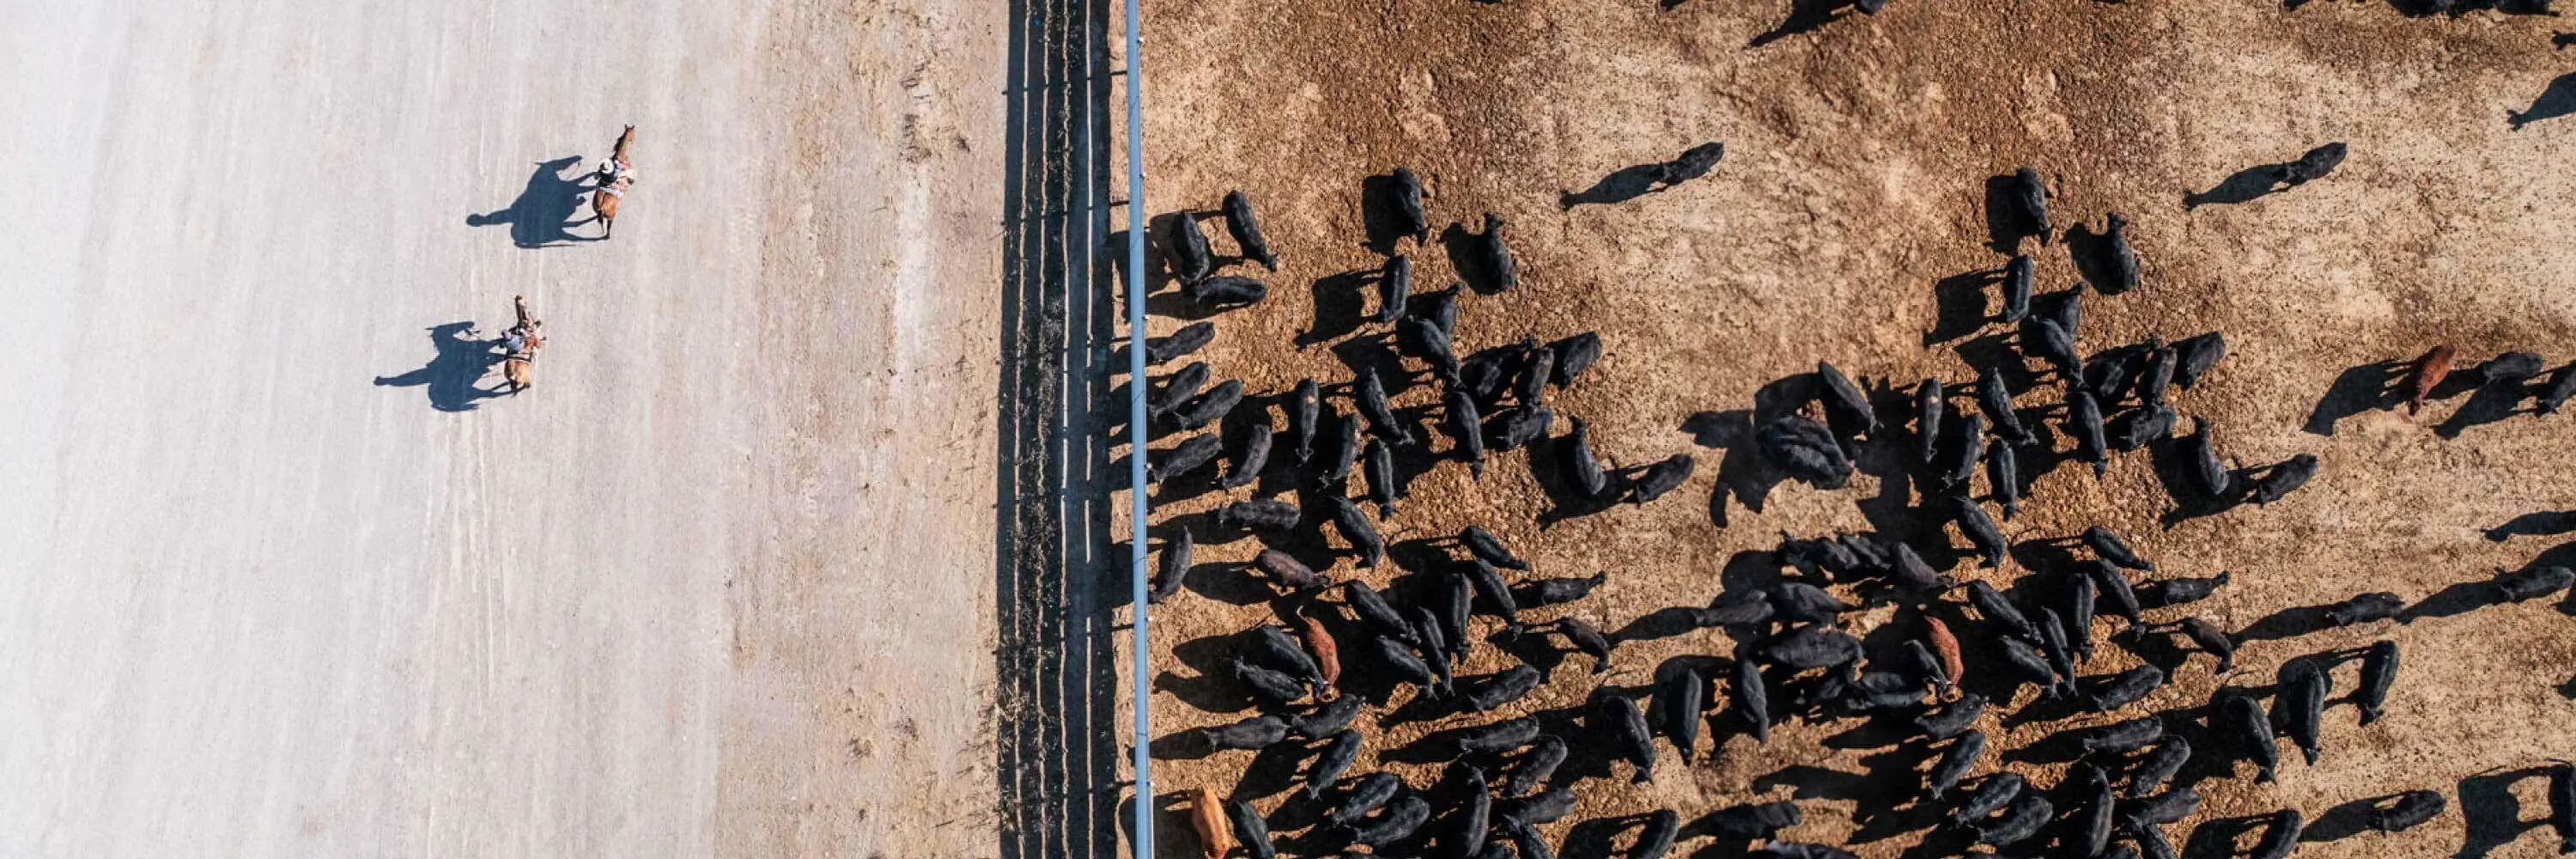 Bird’s-eye view of cattle and two cattle ranchers on horseback.